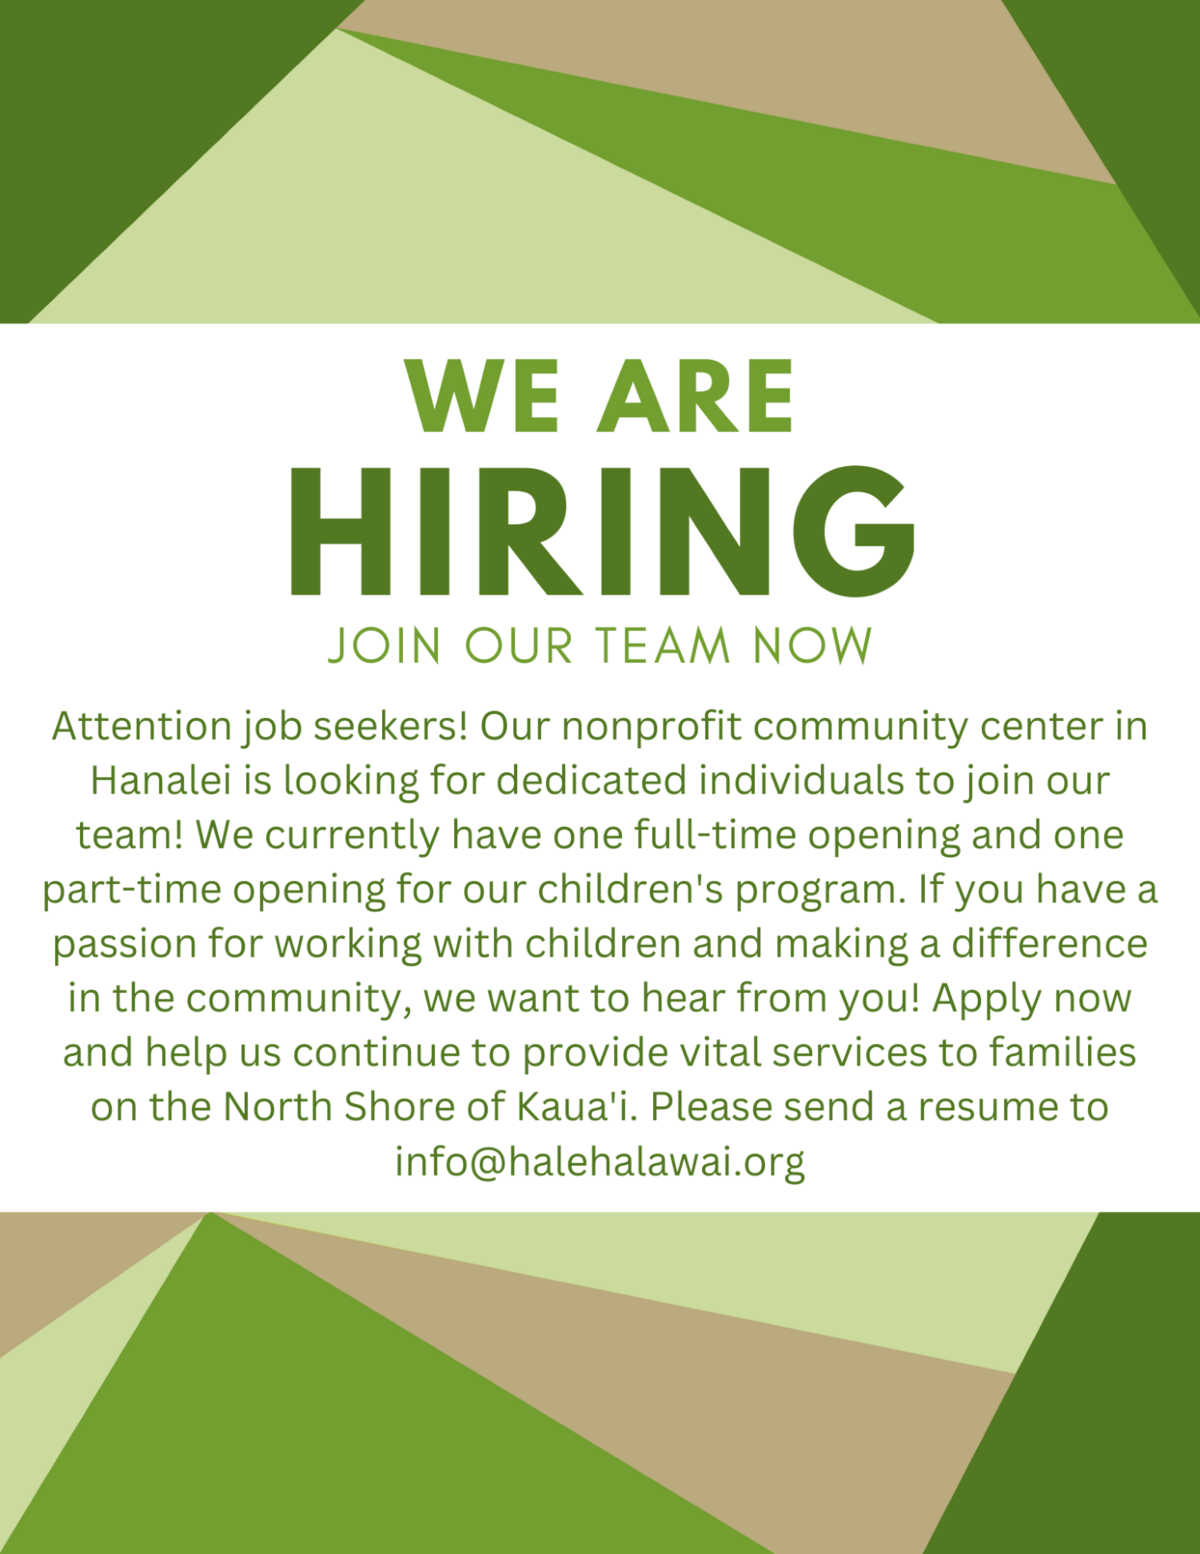 Attention job seekers! Our nonprofit community center in Hanalei is looking for dedicated individuals to join our team! We currently have one full-time opening for our children's program and one part-t (1)